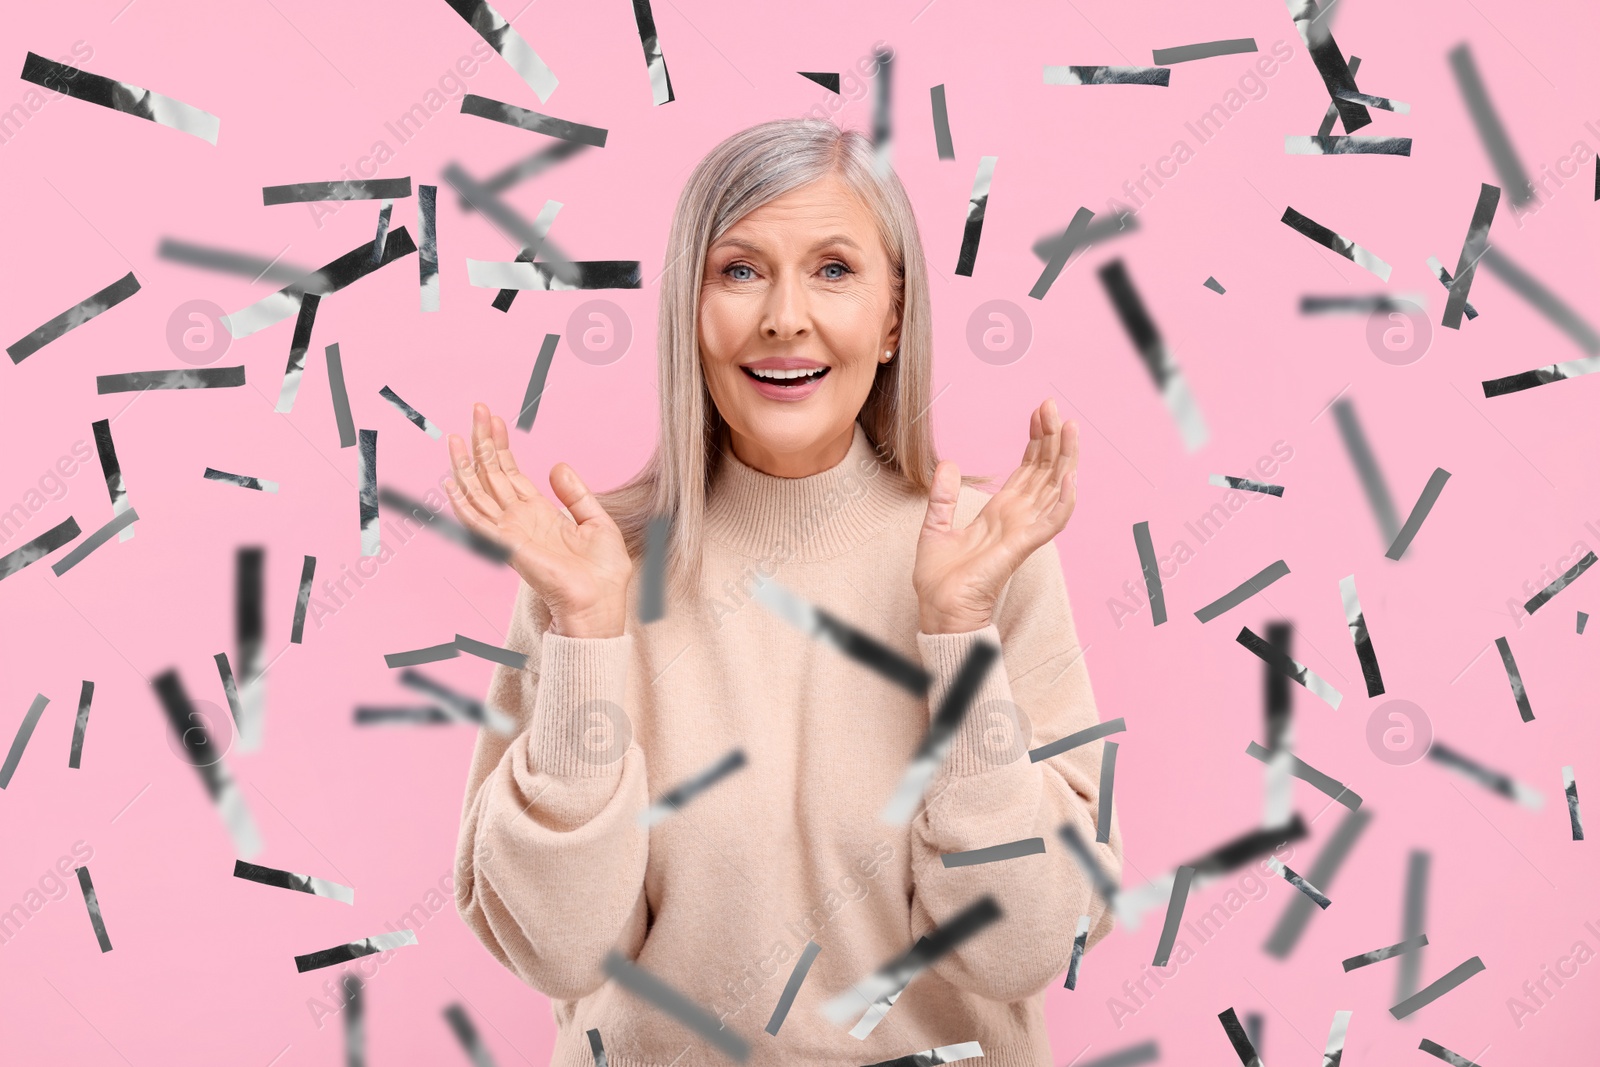 Image of Happy woman and flying confetti on pink background